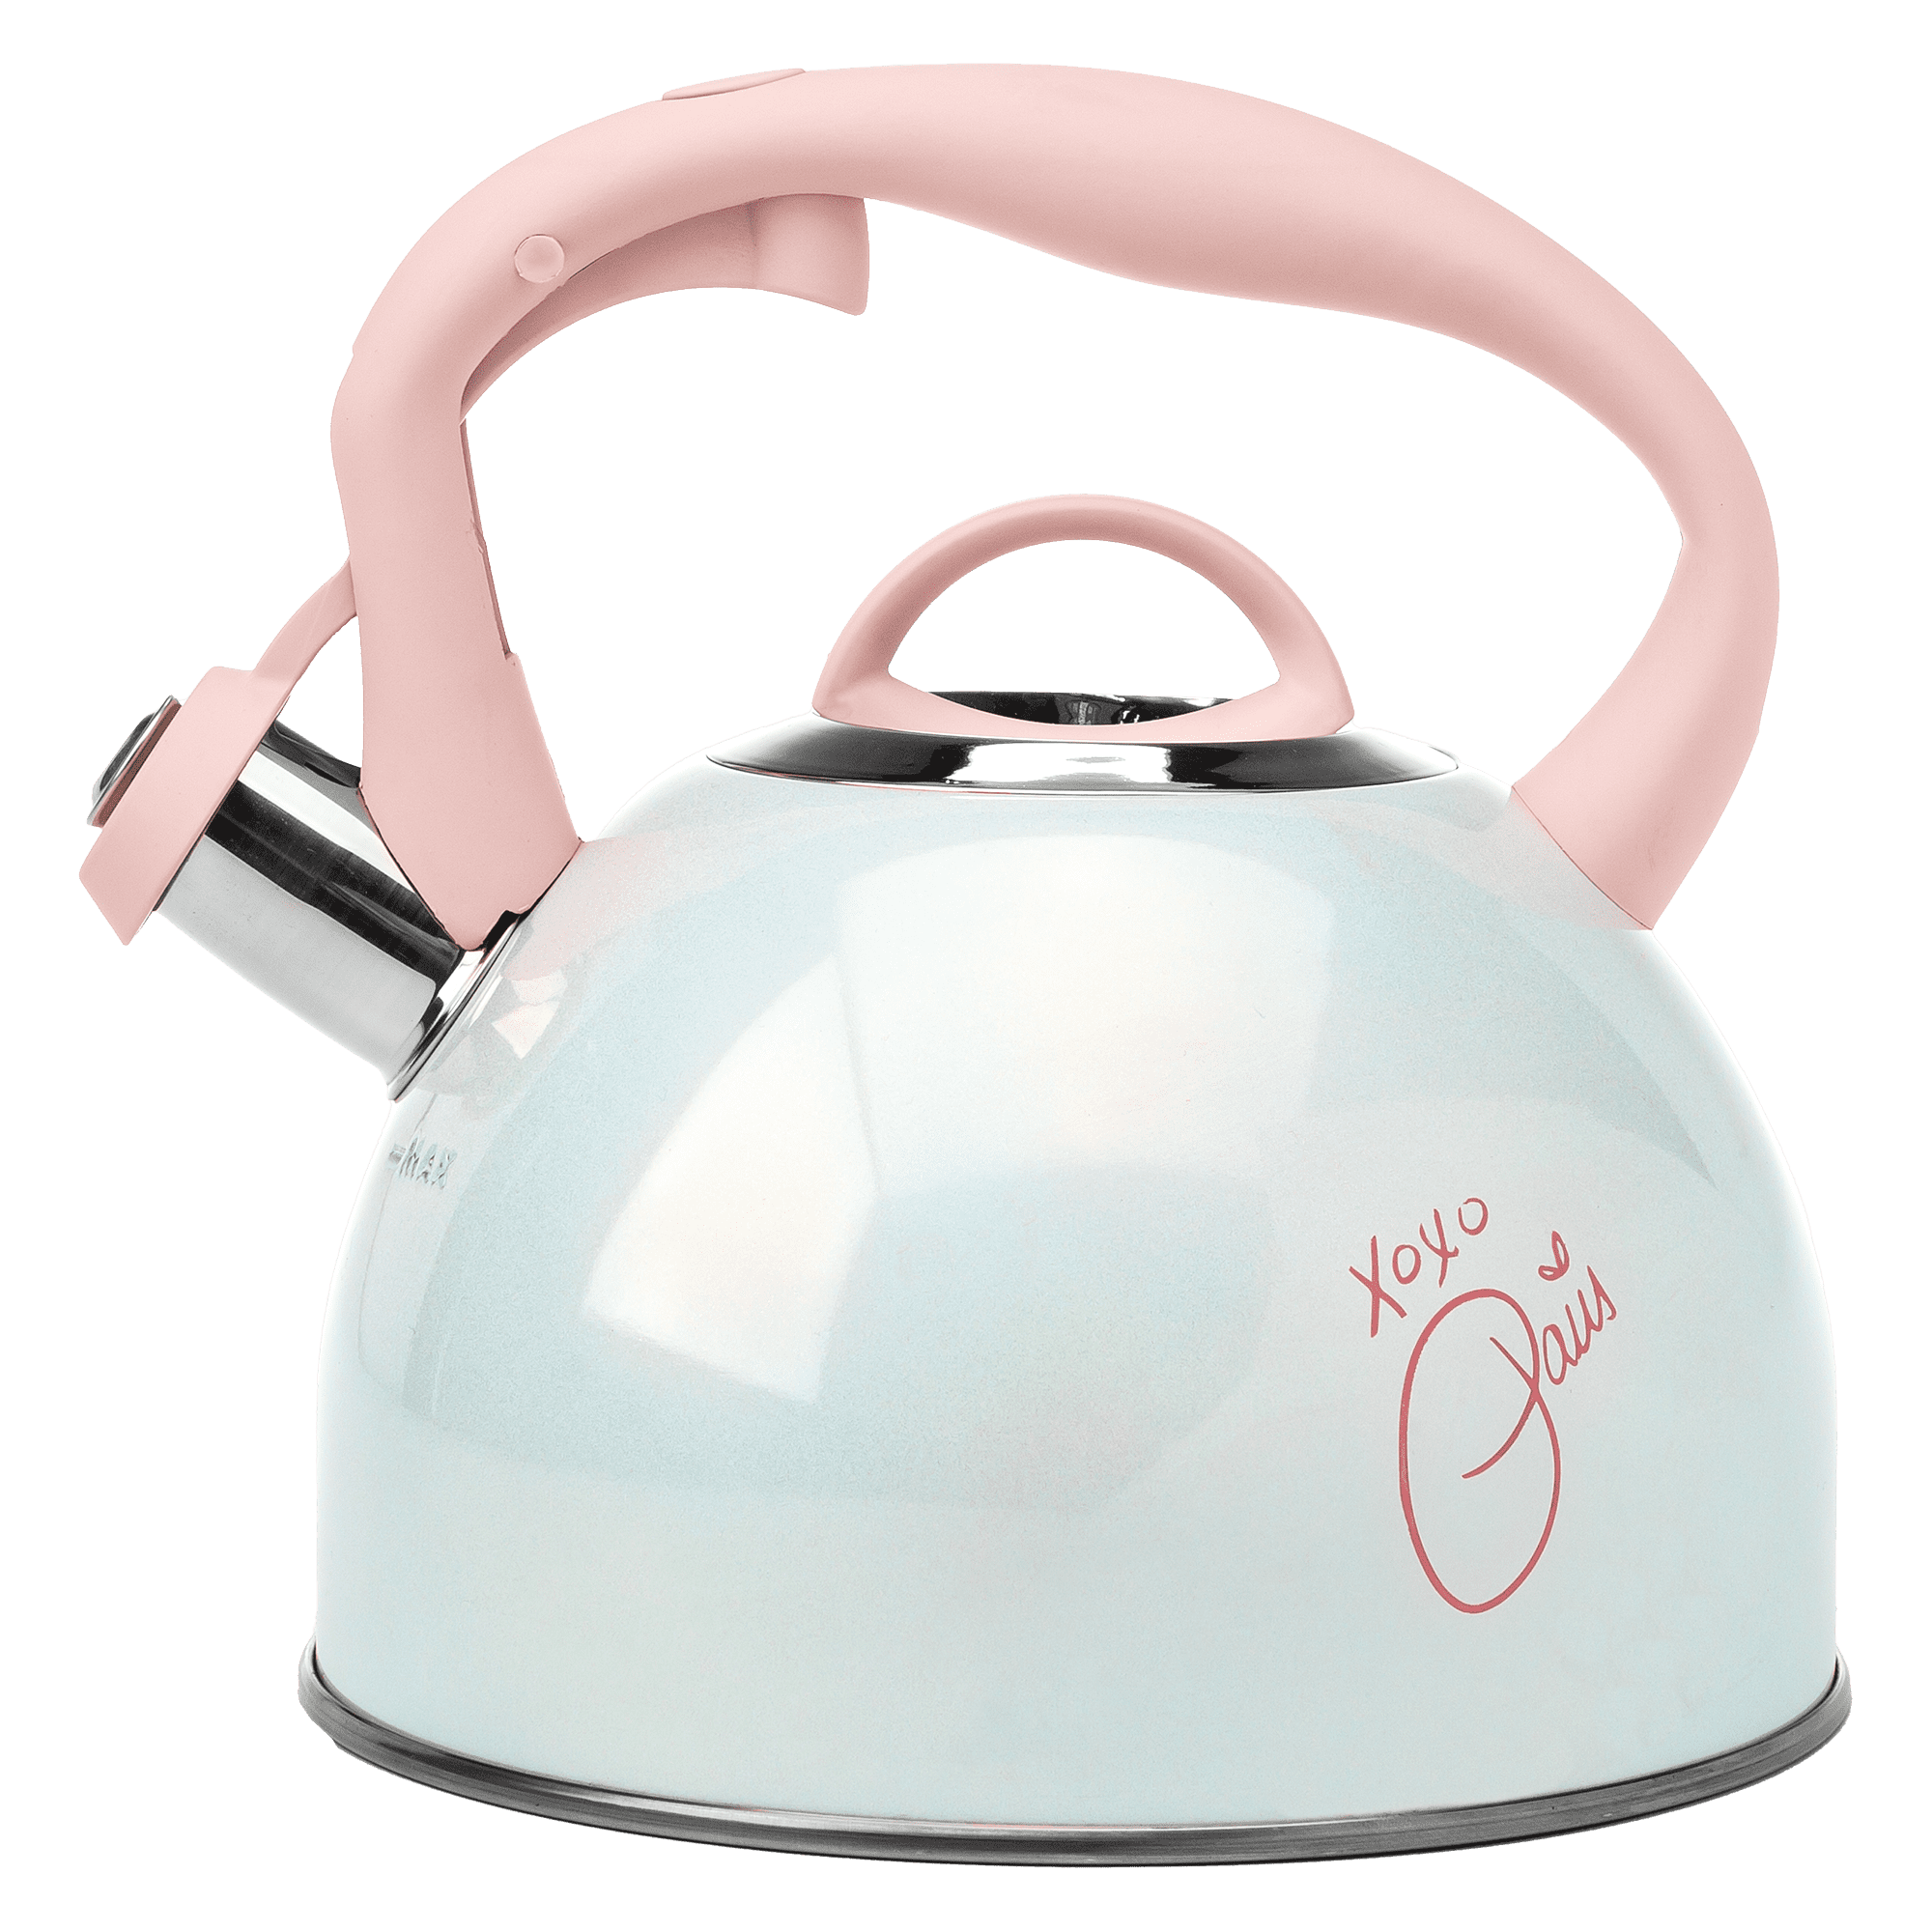 Paris Hilton Whistling Stovetop Tea Kettle, Stainless Steel with Color Changing That's Hot Heat Indicator Design, Soft Touch Handle, 2.5-Quart, Pink